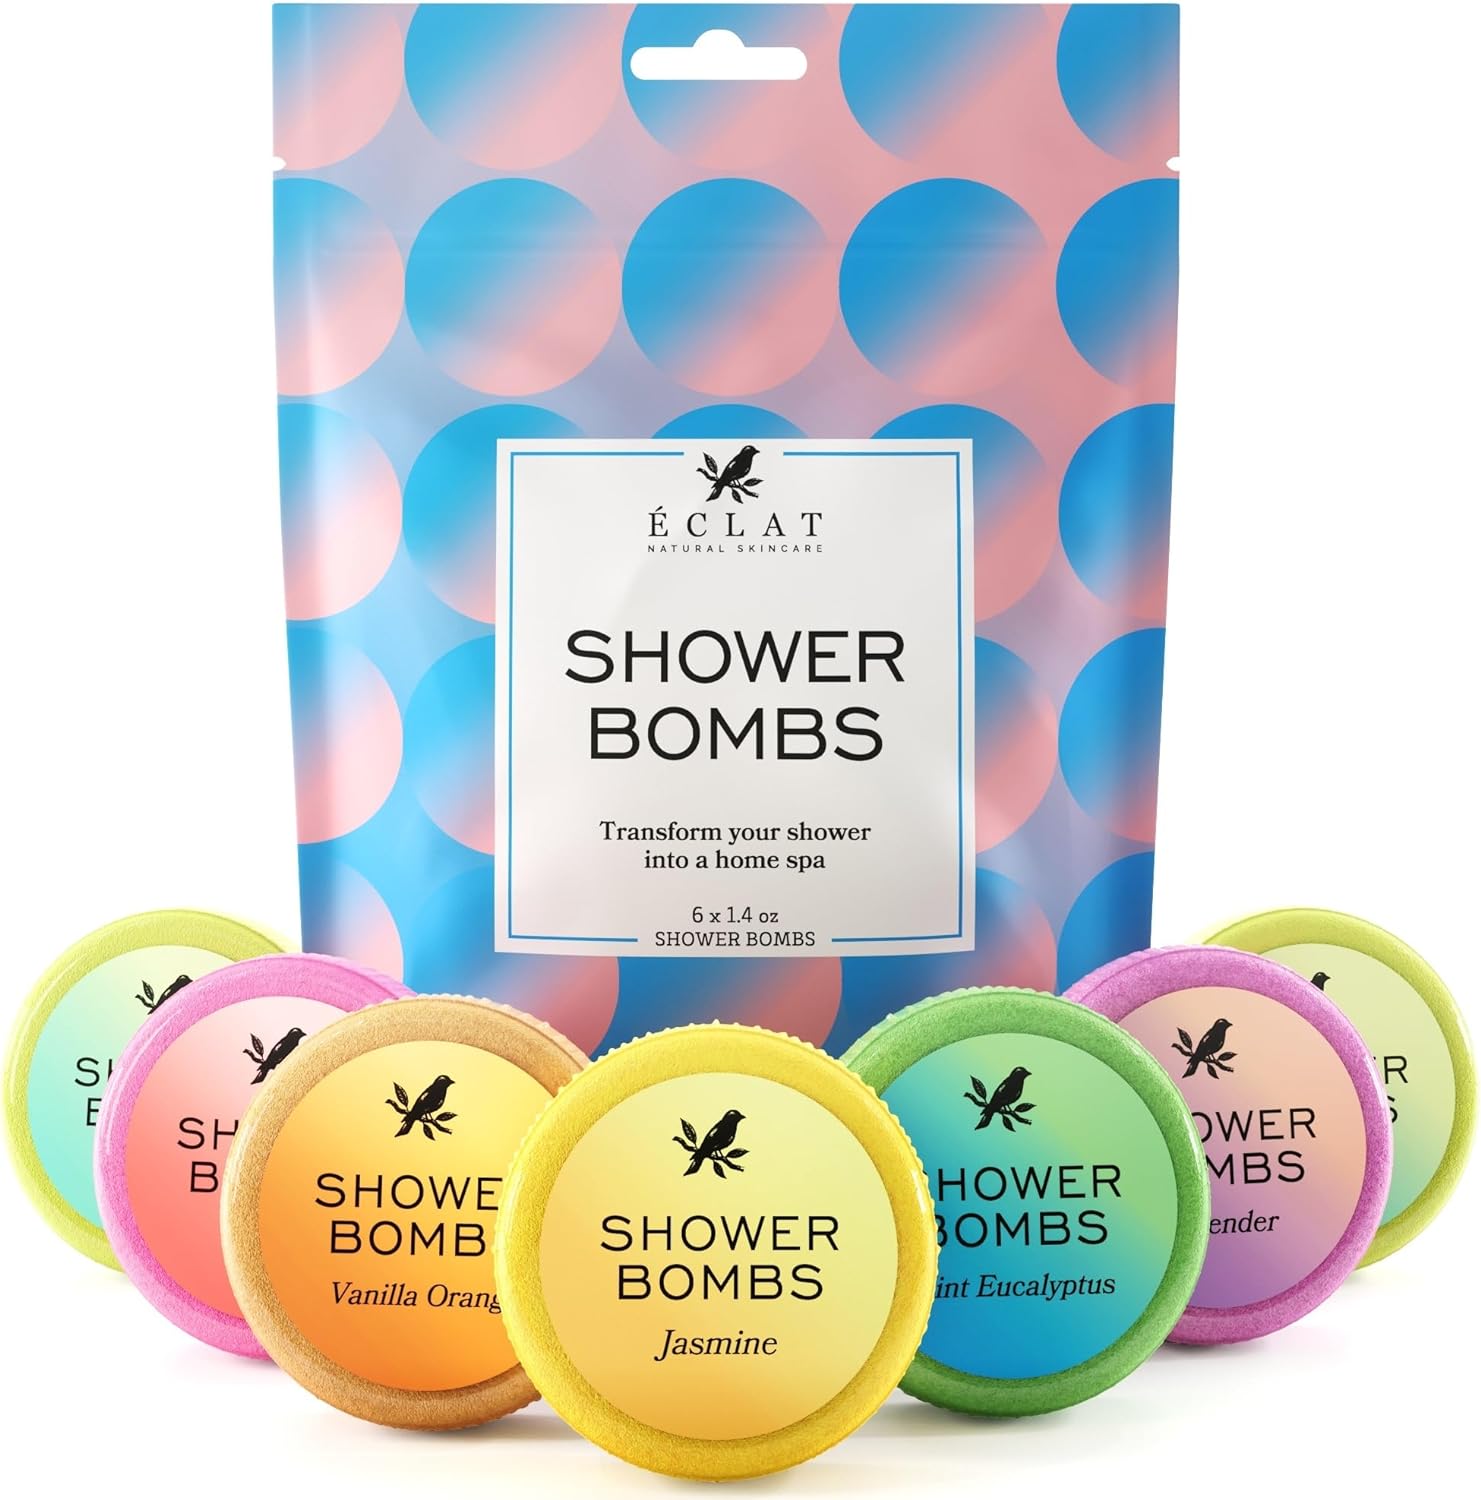 Scented Shower Bombs Aromatherapy 6 Pack - Relaxation, Stress Relief, Home Spa - with Natural Essential Oils: Lavender, Eucalyptus, Rose, Mint – Shower Bombs for Women, Gifts for Women, Shower Bombs